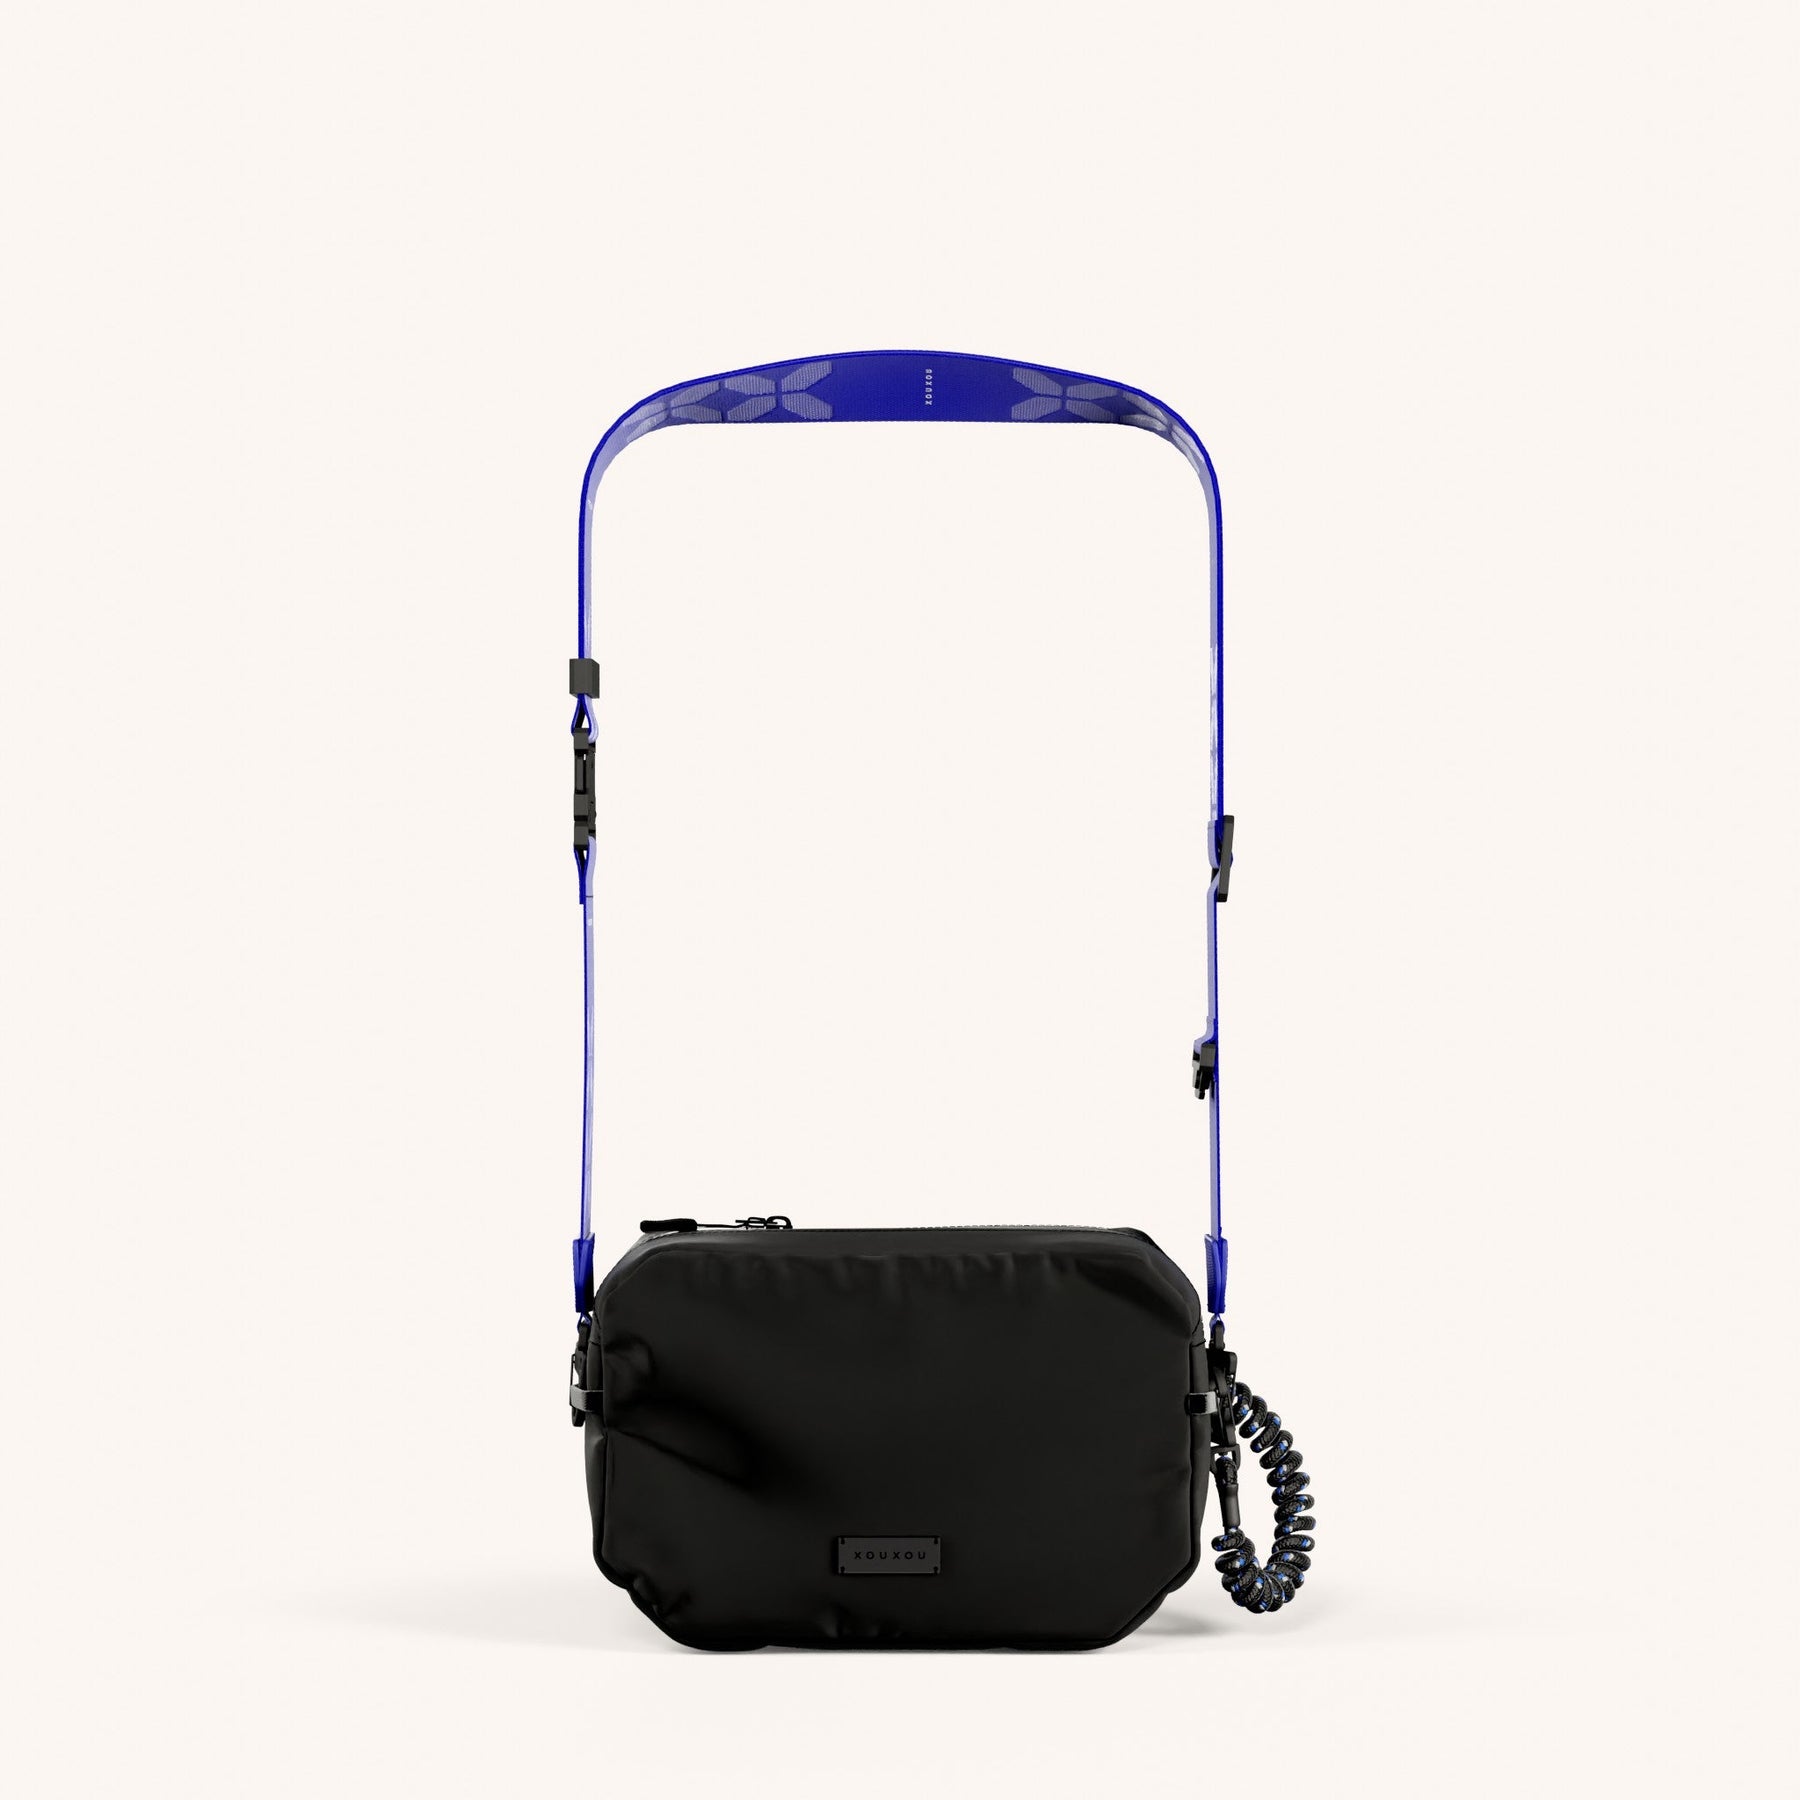 Crossbody Bag with Ultrawide Lanyard in Black + Blue Total View | XOUXOU